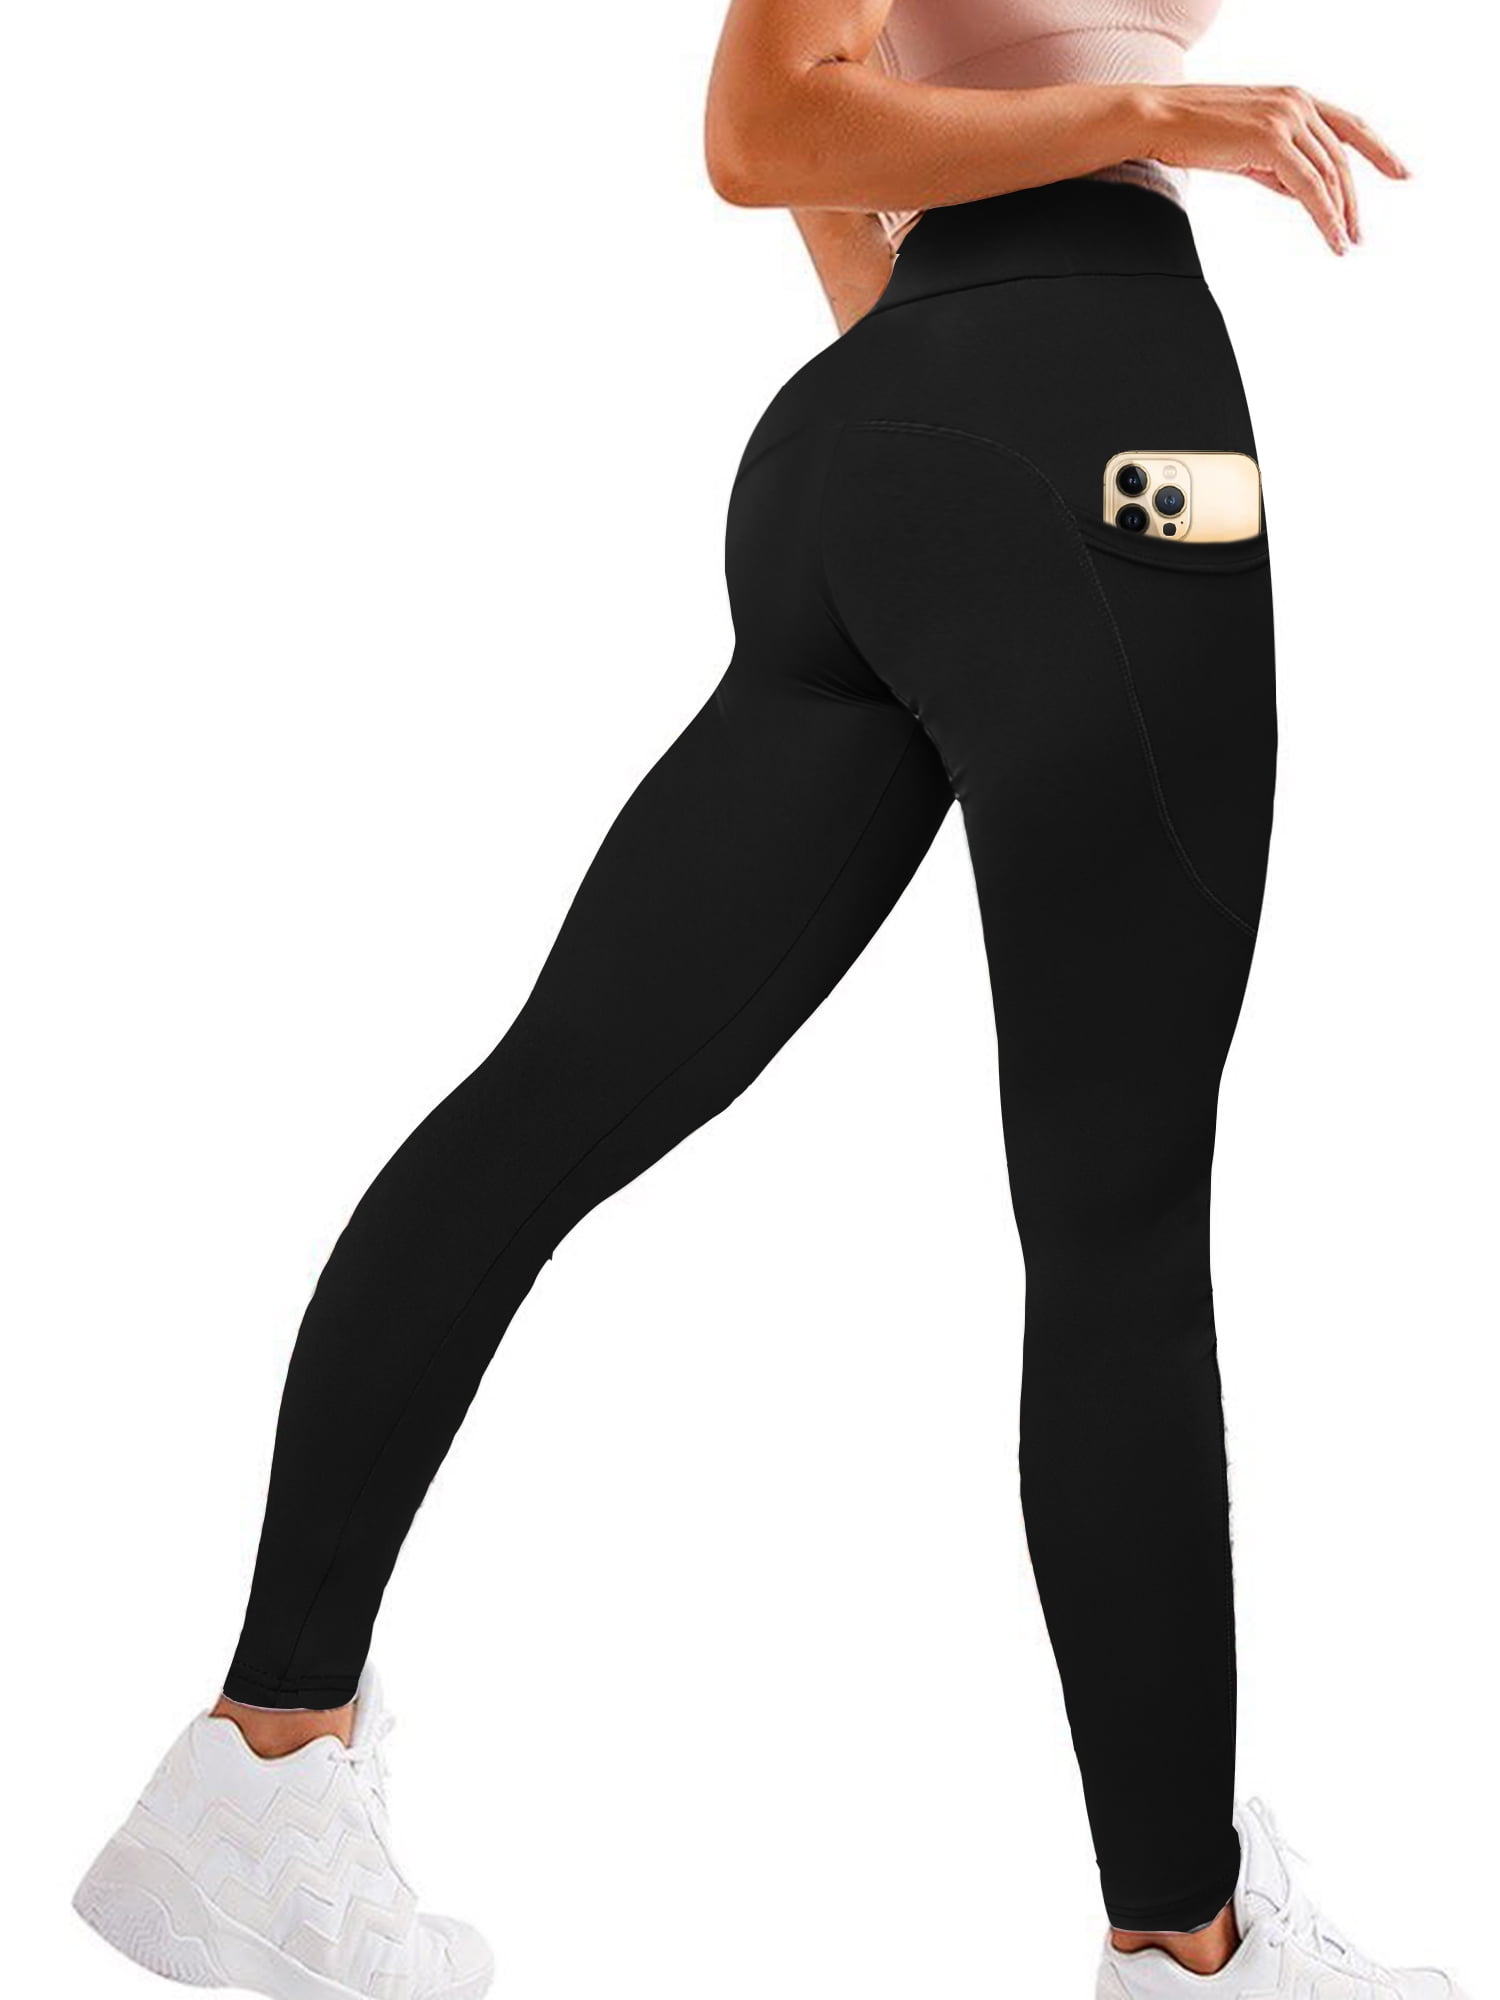 Fitness Workout High Waist Yoga Pants for Women with Pockets Athletic Soft Tummy Control Leggings for Running 